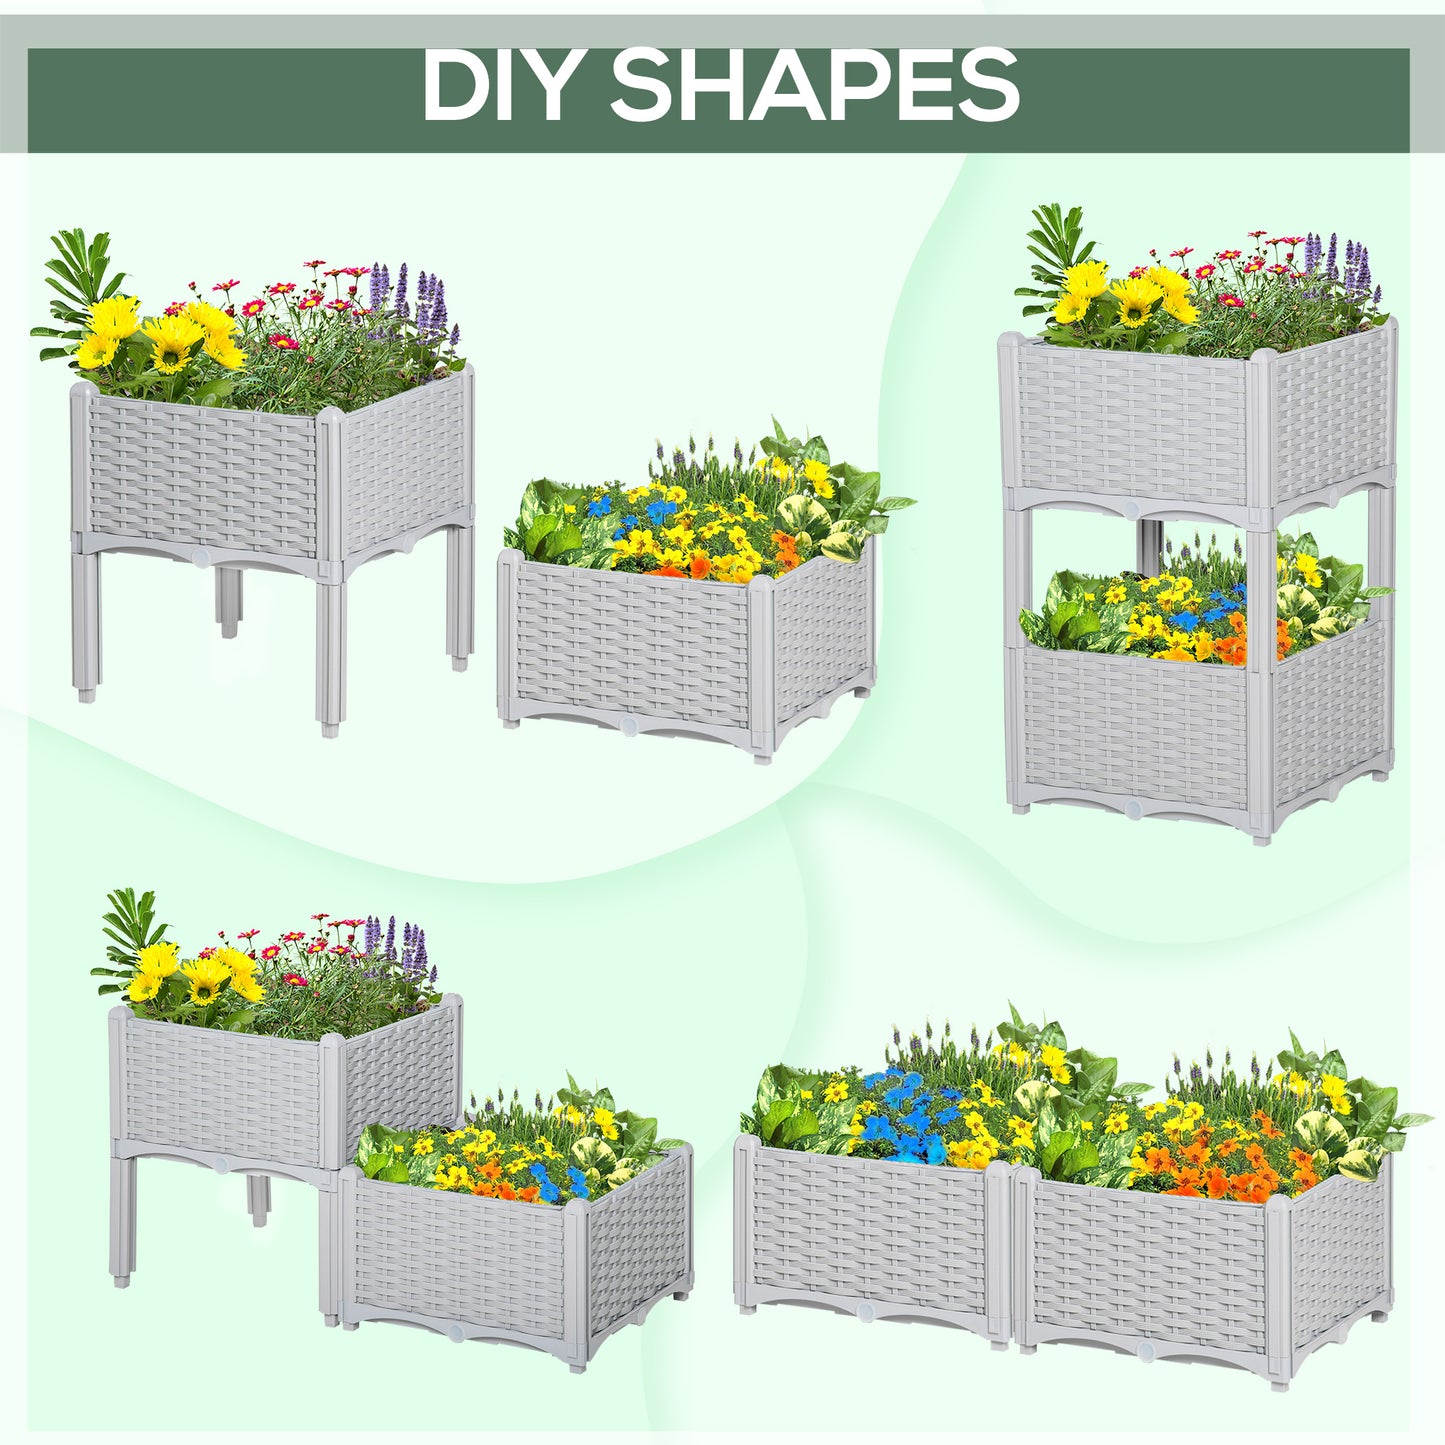 Outsunny 40cm x 40cm x 44cm Set of 2 Garden Raised Bed Elevated Patio Flower Plant Planter Box PP Vegetables Planting Container, Grey